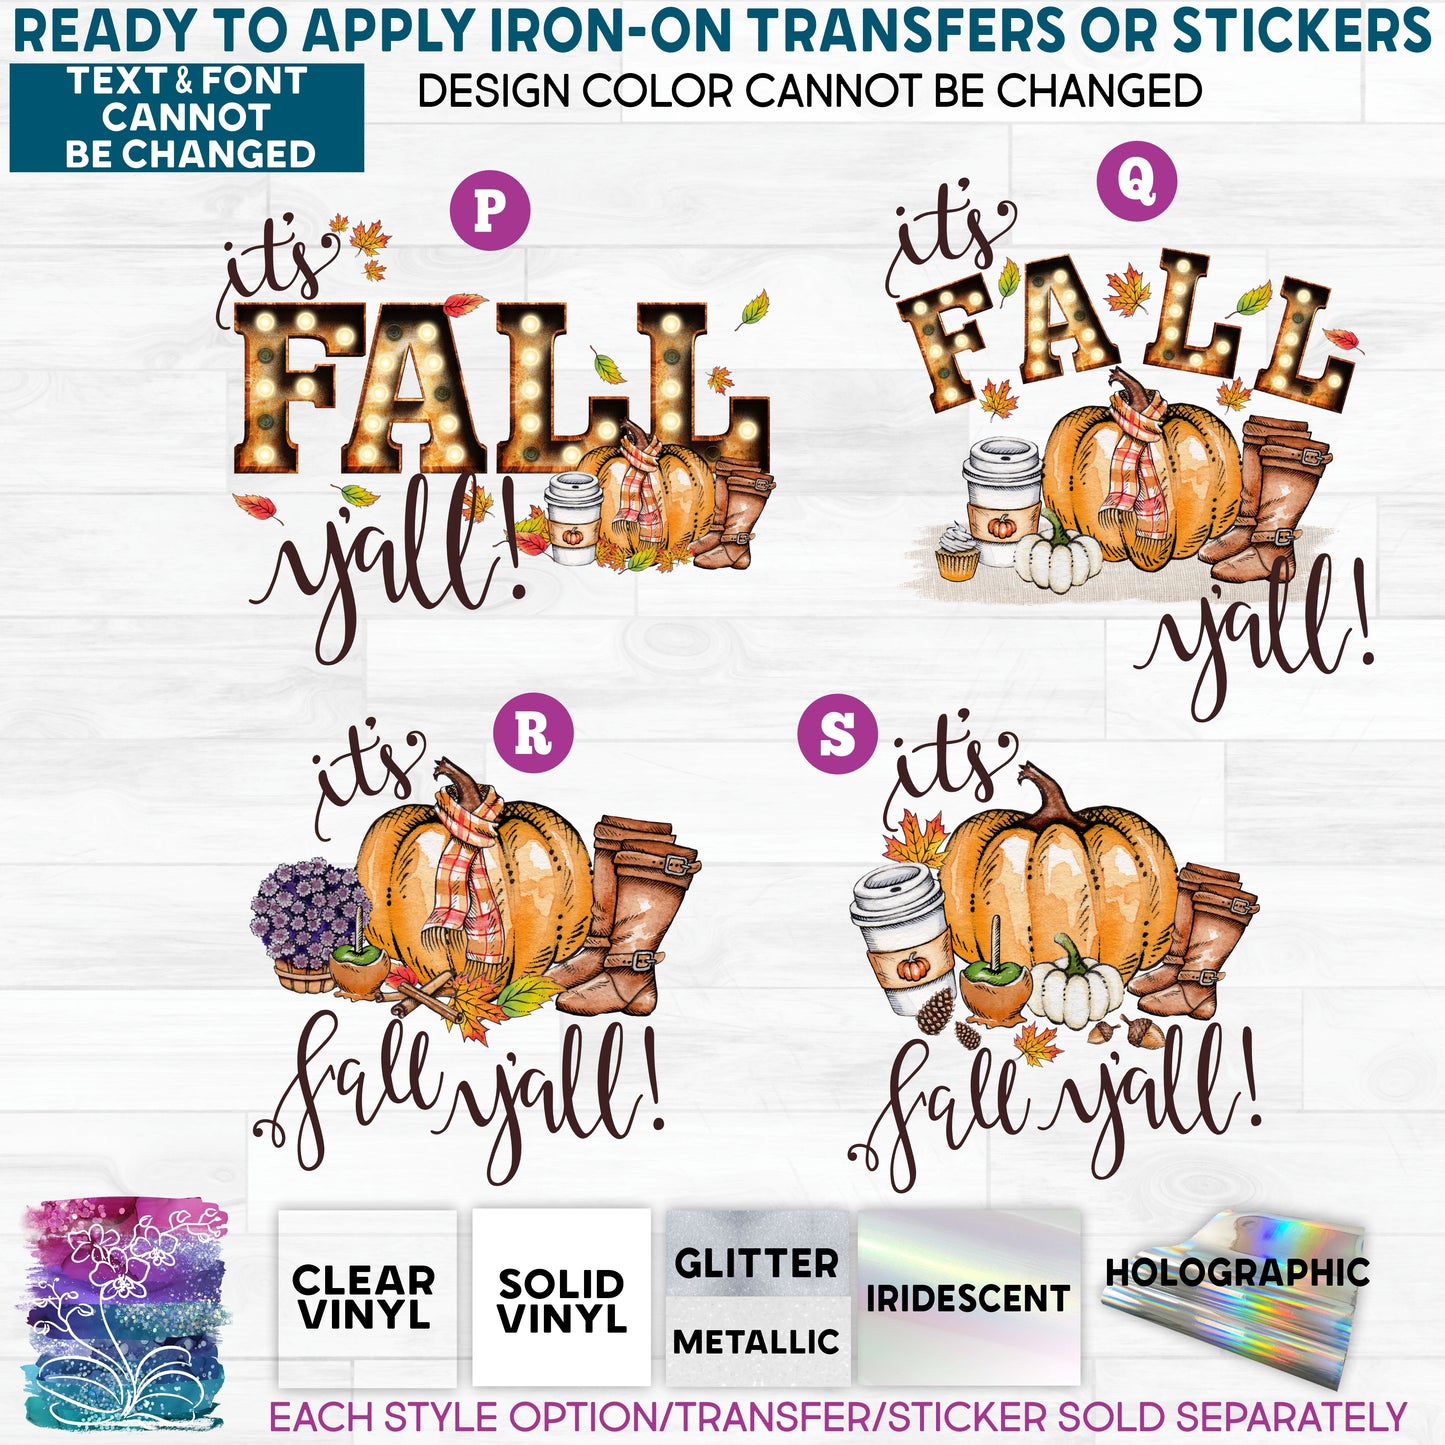 (s354-2) It's Fall Y'all Marquee Pumpkin Spice Latte Boots Glitter or Vinyl Iron-On Transfer or Sticker